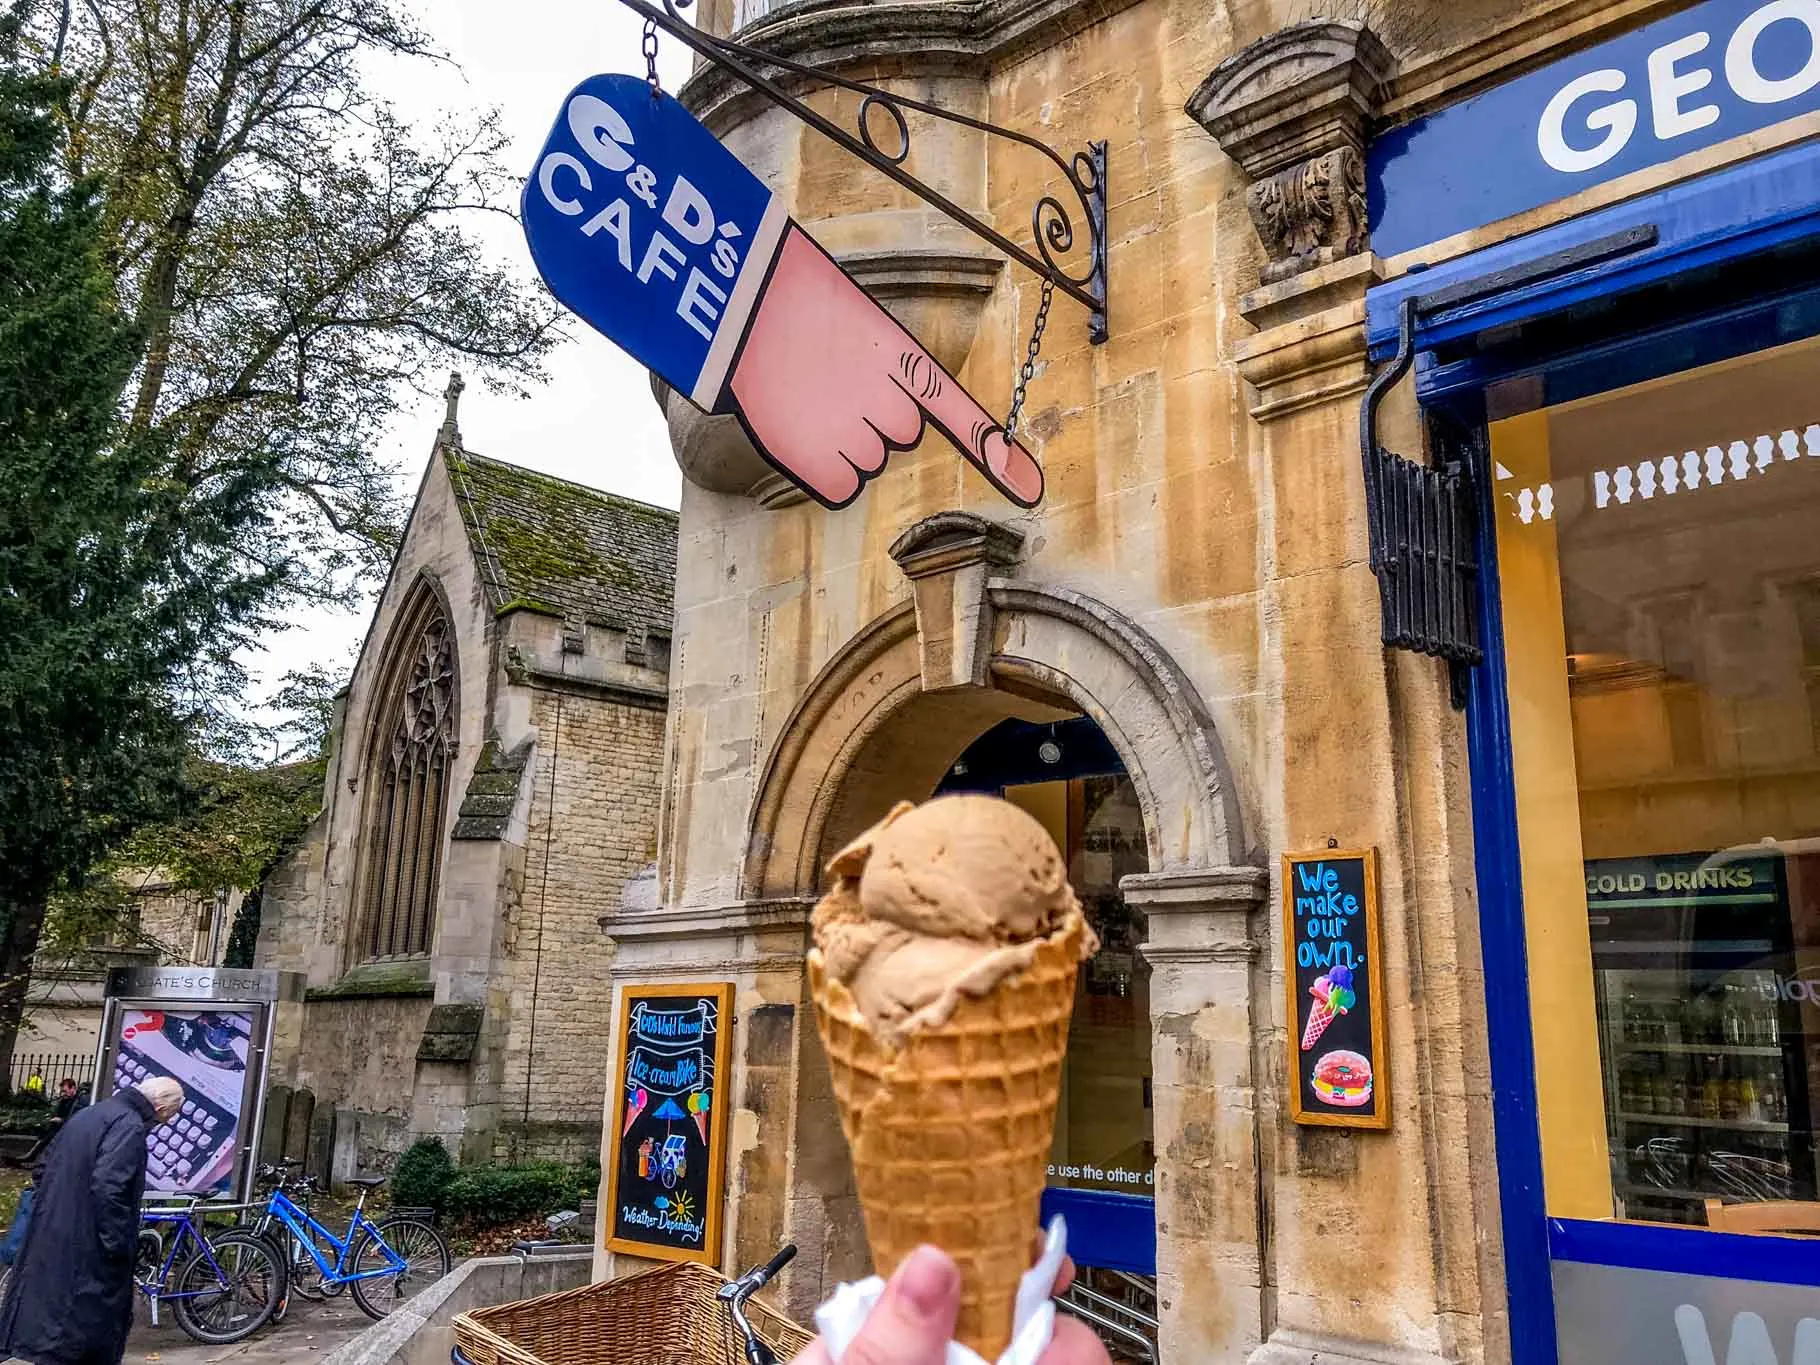 Ice cream cone in front of a hand-shaped sign for G&D's Cafe.